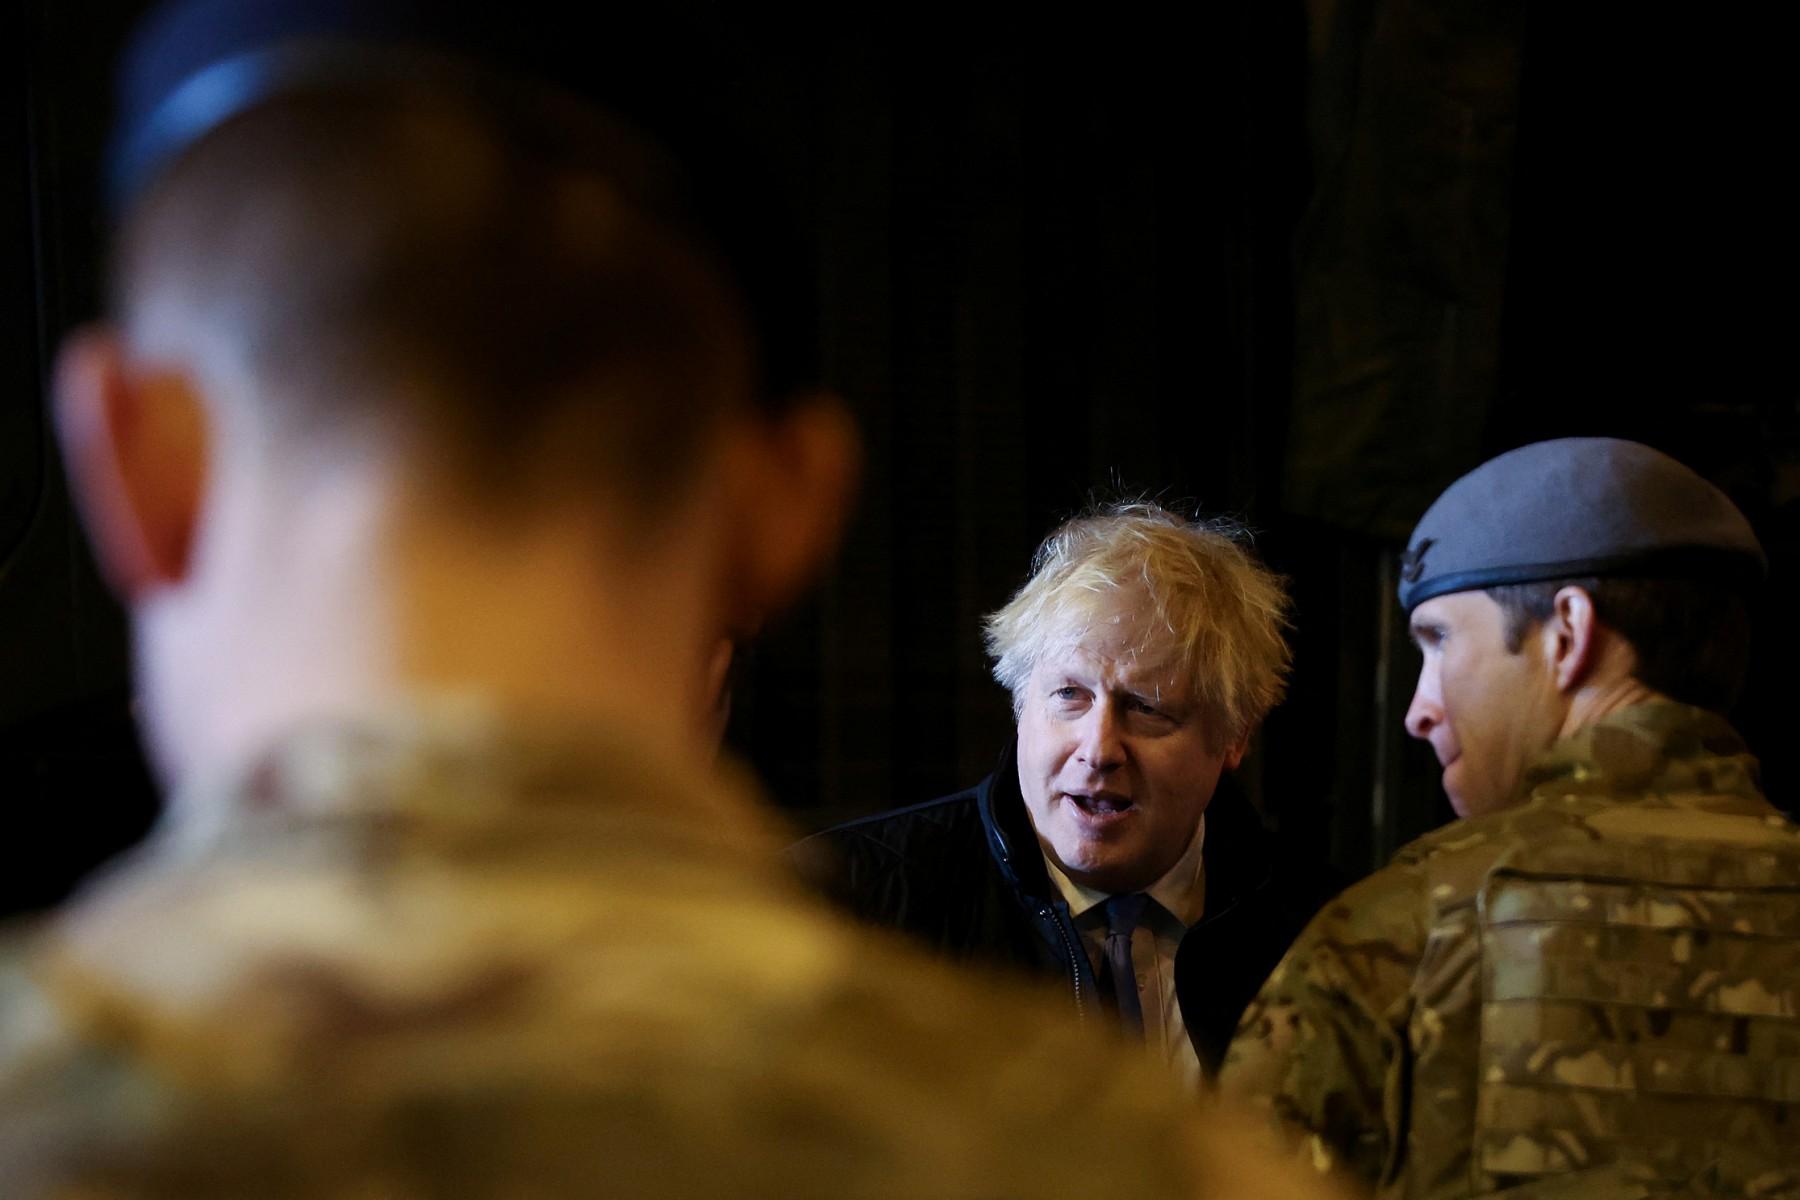 British Prime Minister Boris Johnson speaks with troops during a visit to the Royal Air Force Station in Waddington, Lincolnshire, on Feb 17. Photo: AFP